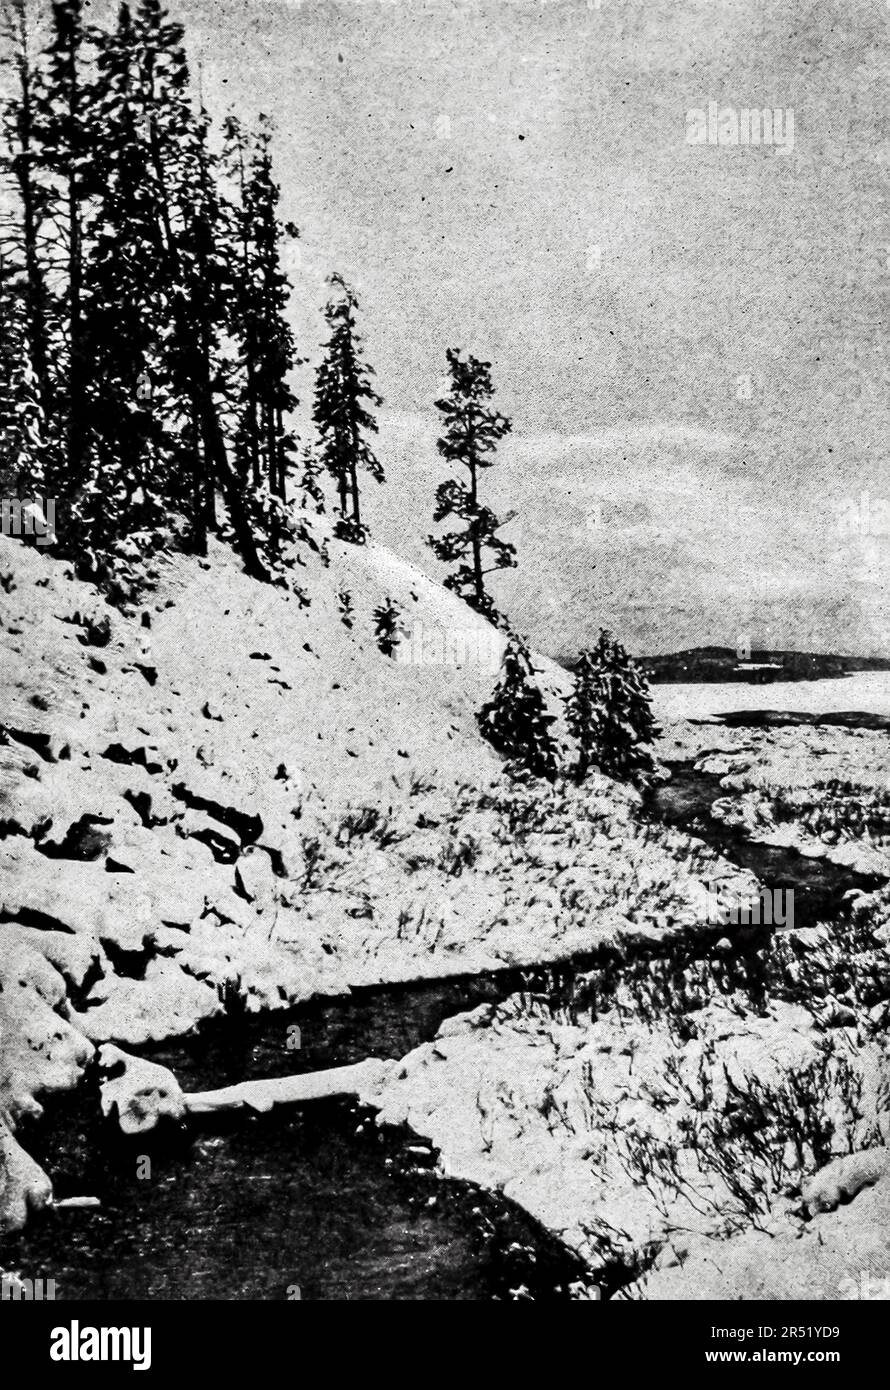 An Upland Brook May in the Yellowstone, black and white vintage photograph by Clifton Johnson, from the guide book ' Highways and byways of the Rocky Mountains ' Publication date 1910 Publisher Macmillan Company New York and London Stock Photo